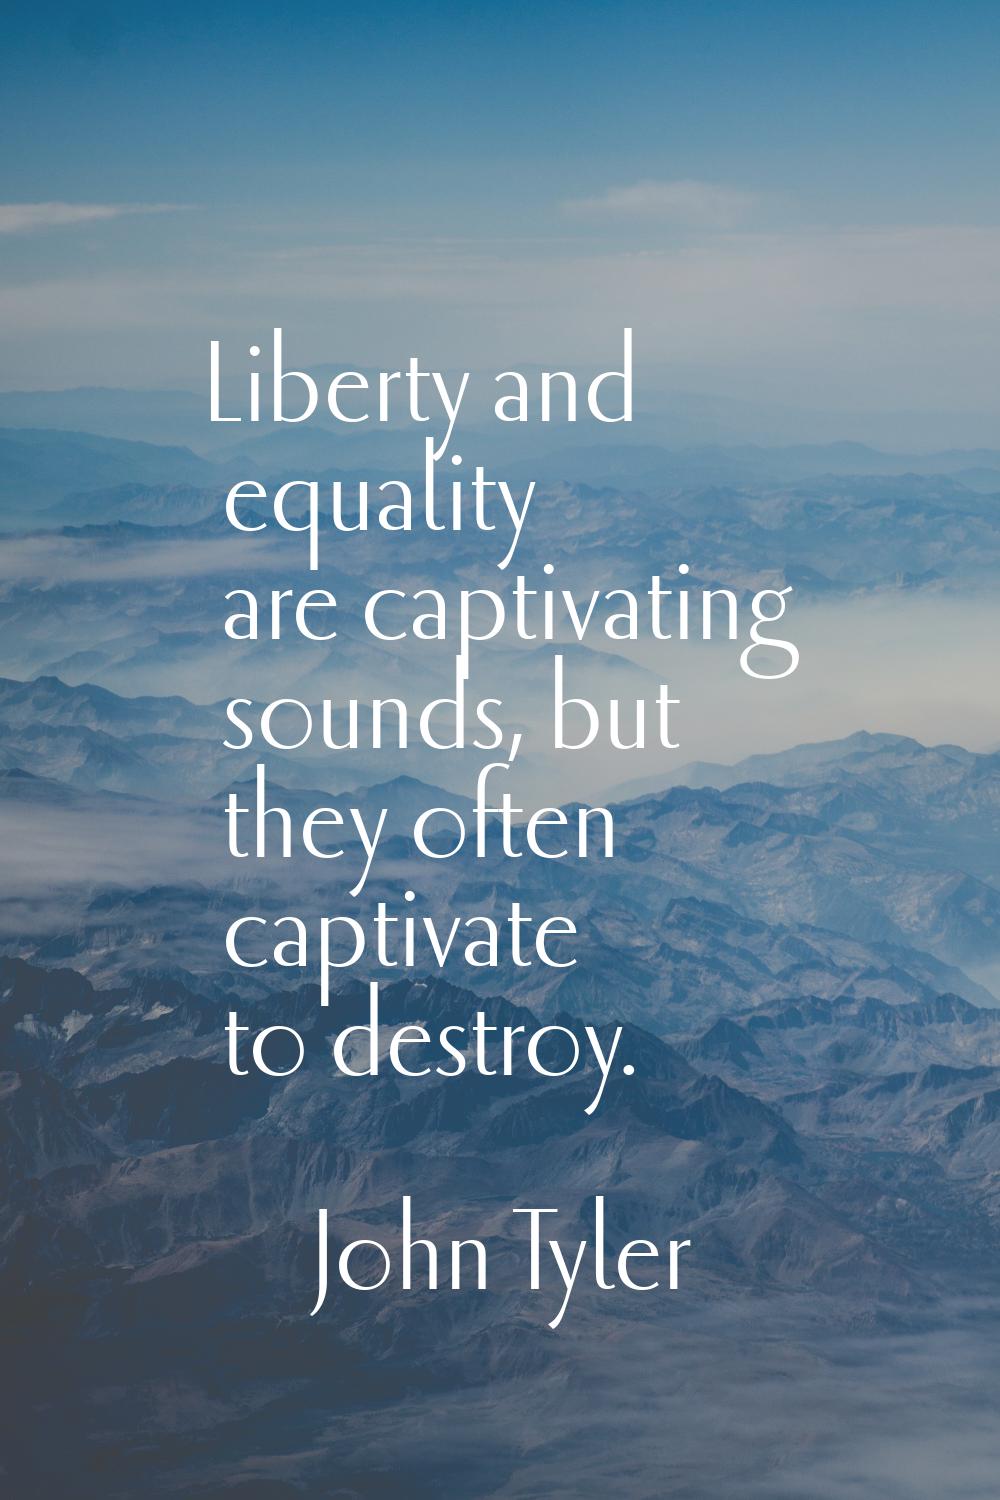 Liberty and equality are captivating sounds, but they often captivate to destroy.